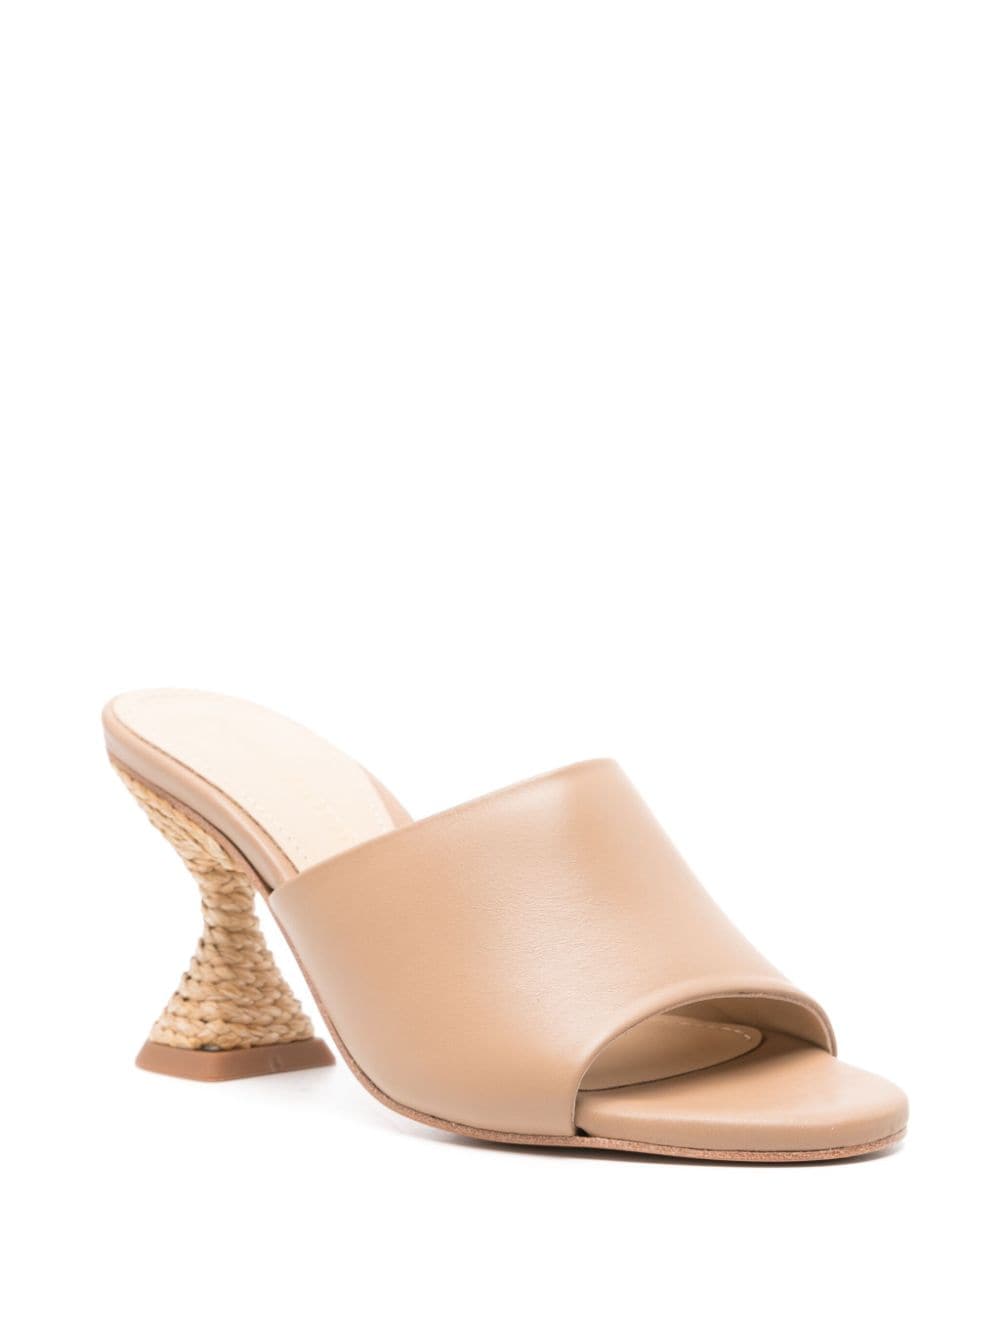 Paloma Barceló 90mm leather mules - Beige